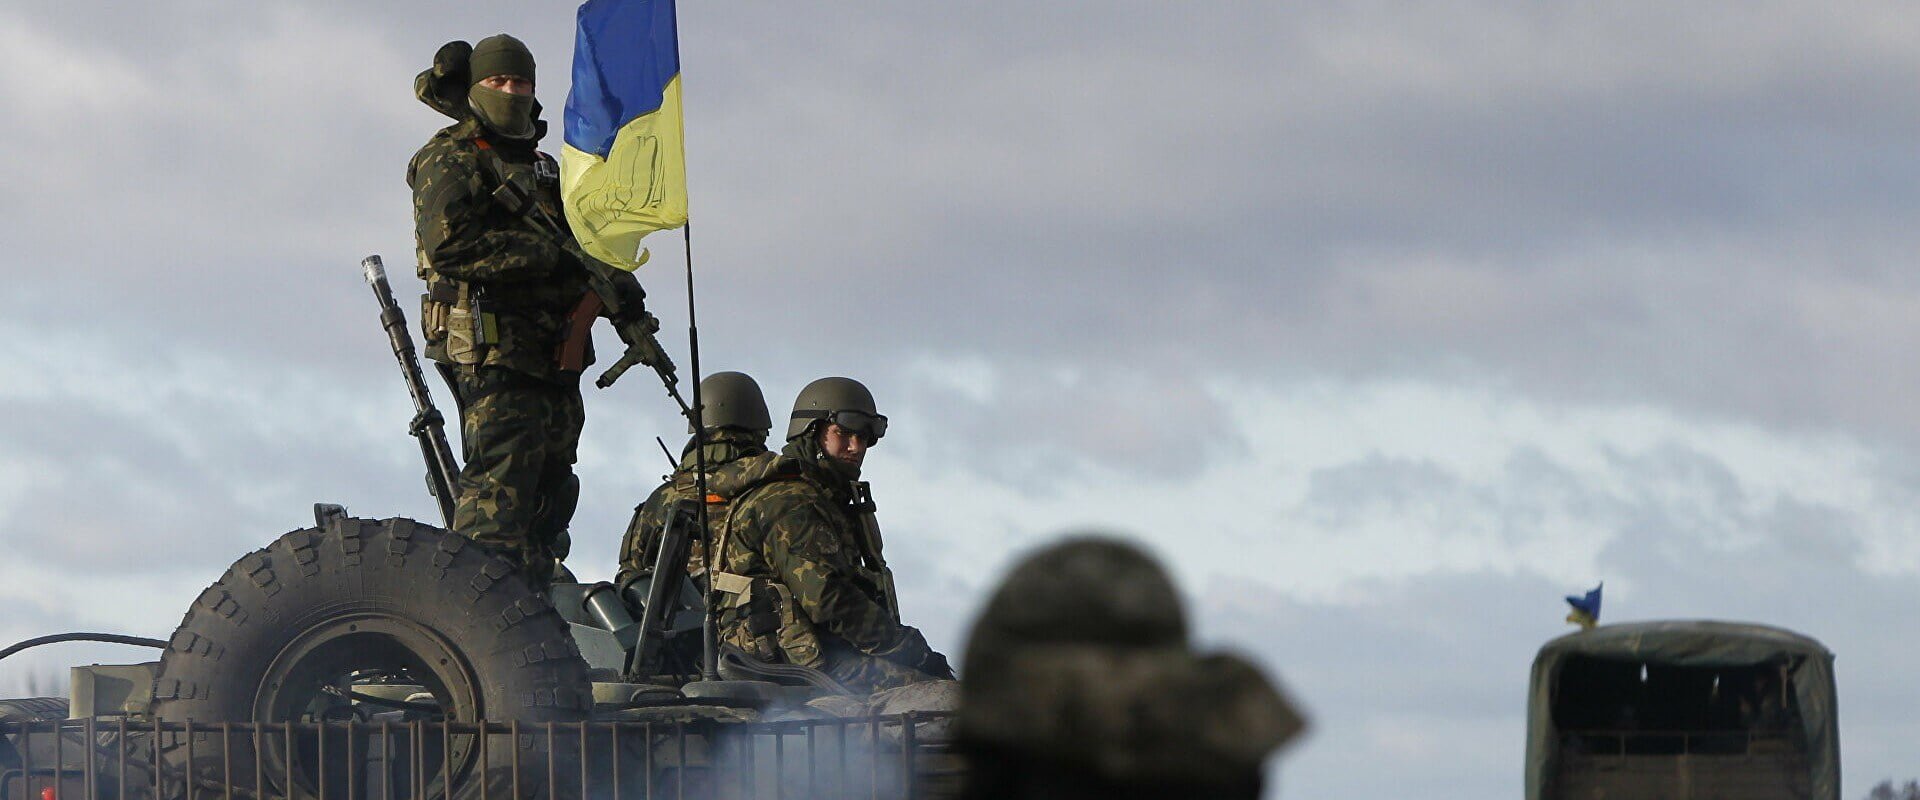 Support to the Armed Forces of Ukraine